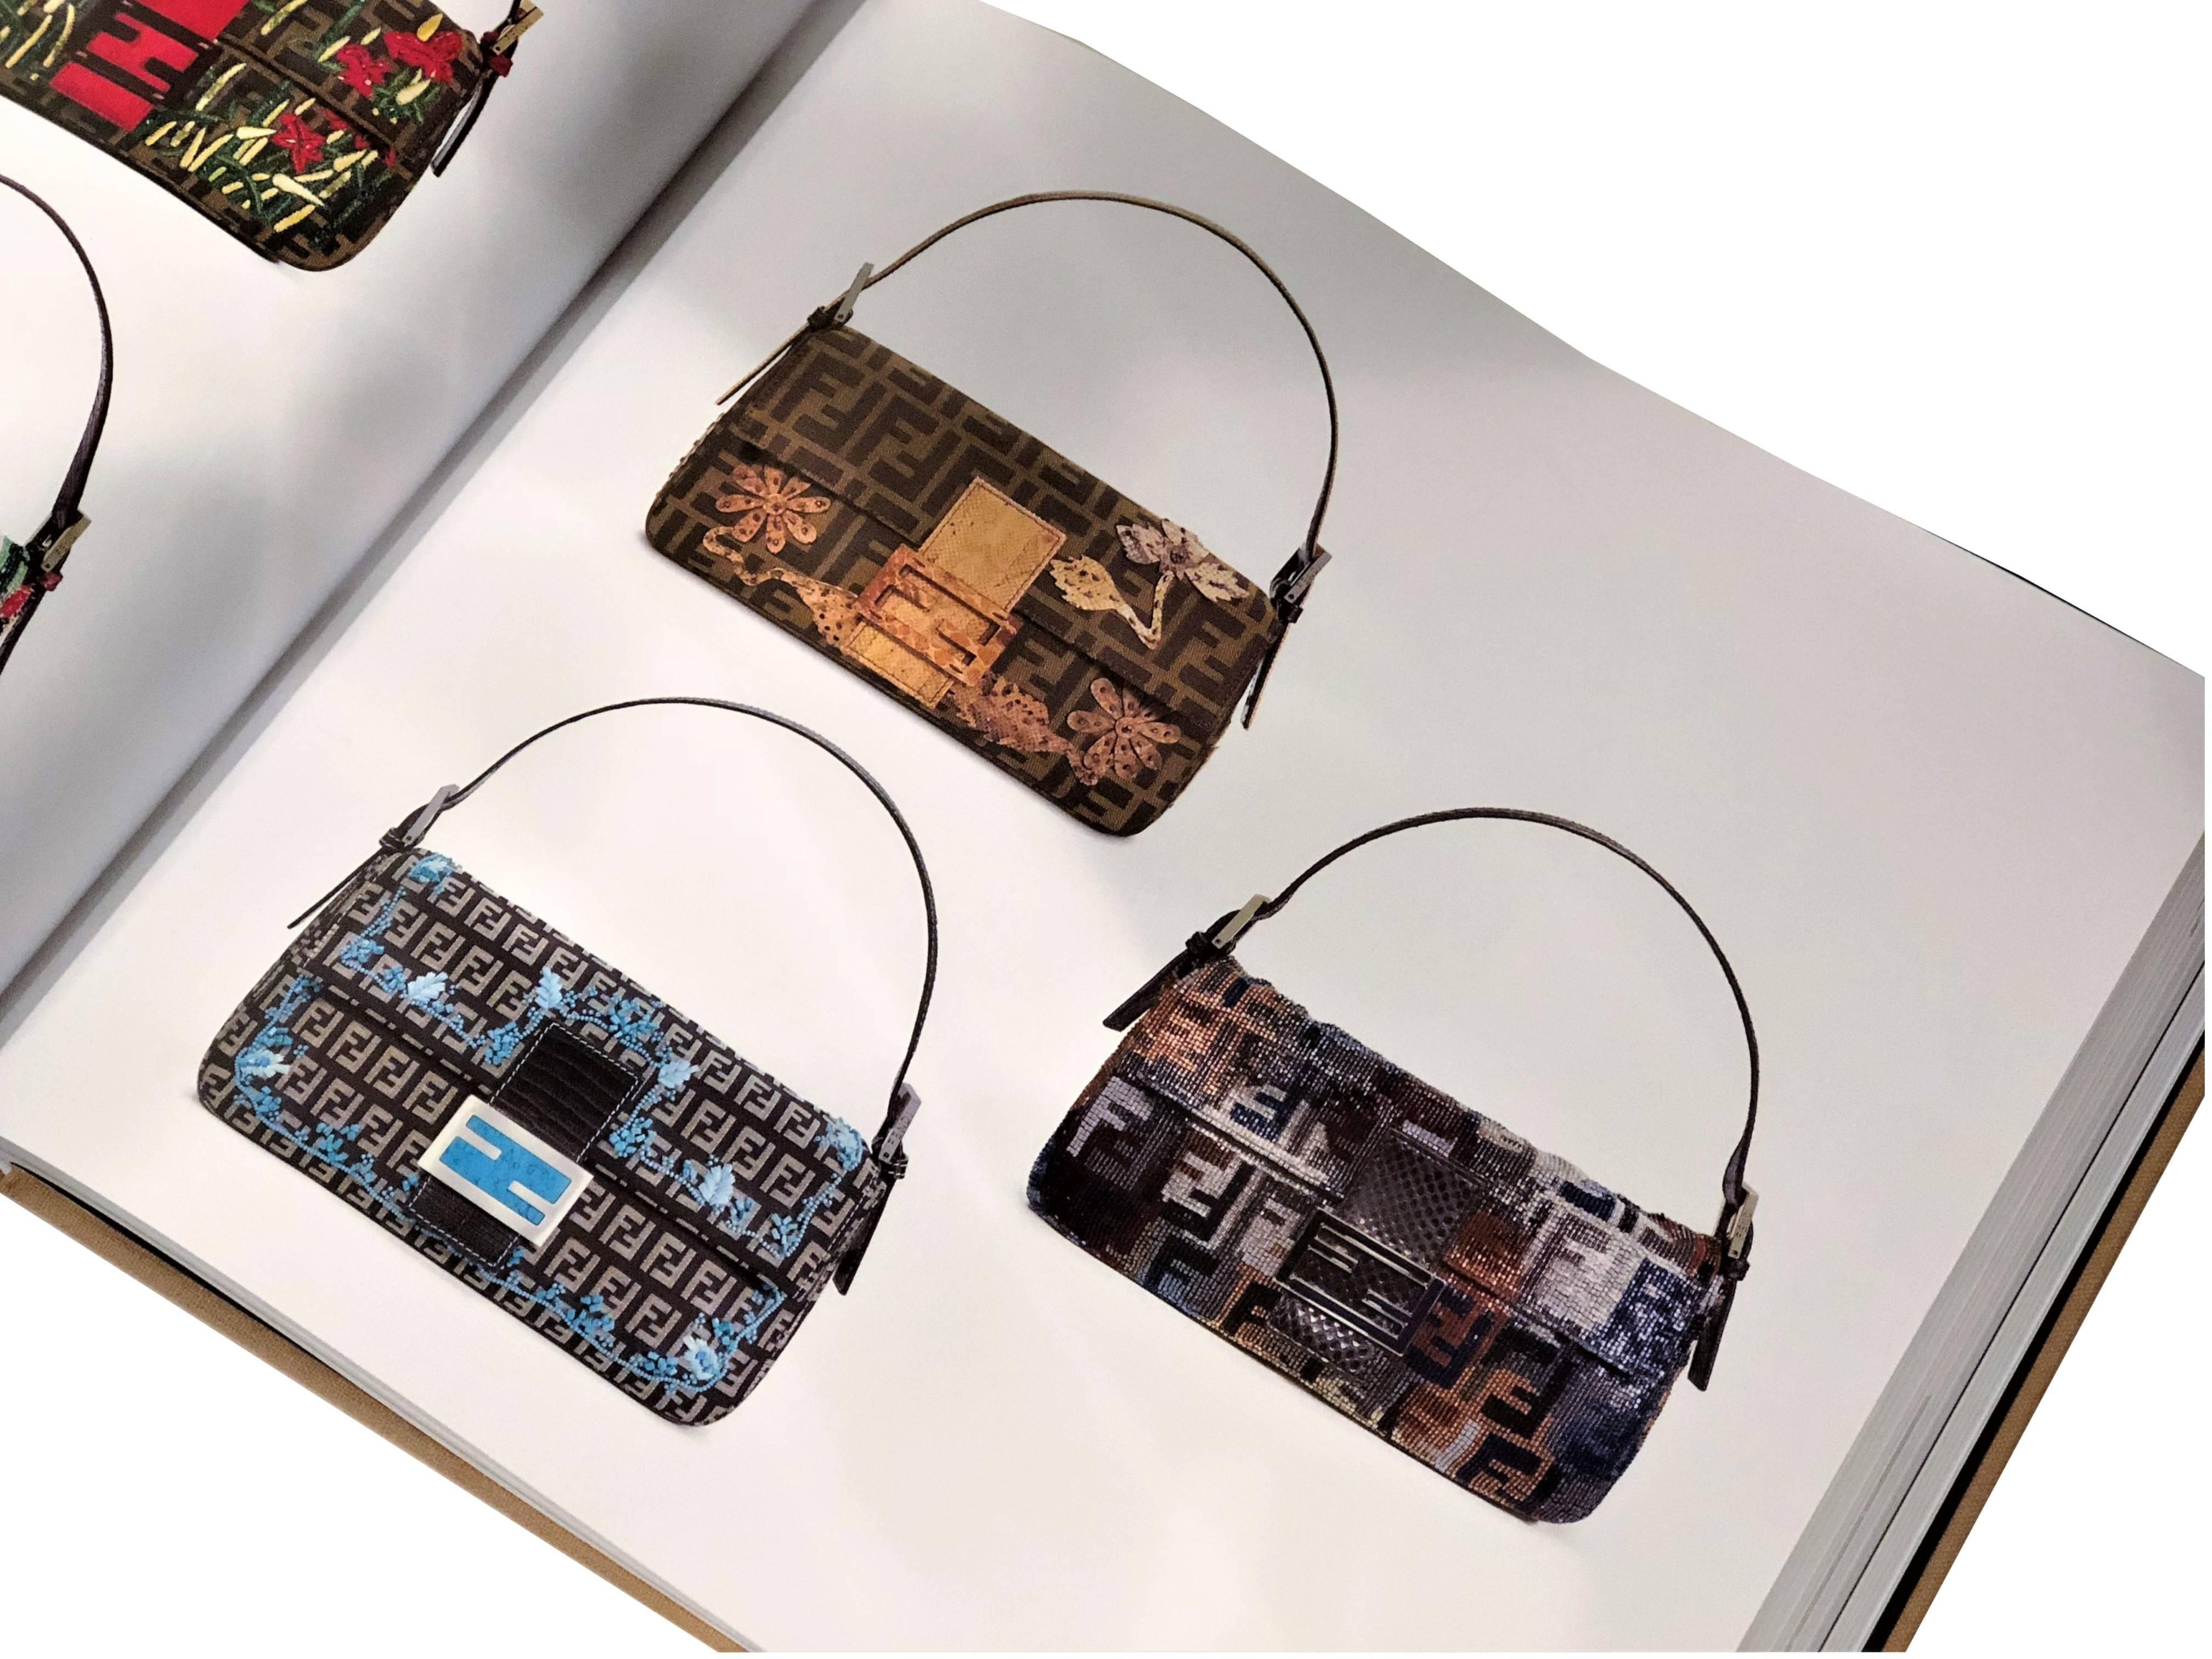 New Fendi Zucca Python Baguette Bag Featured in the 15th Anniversary Book 1